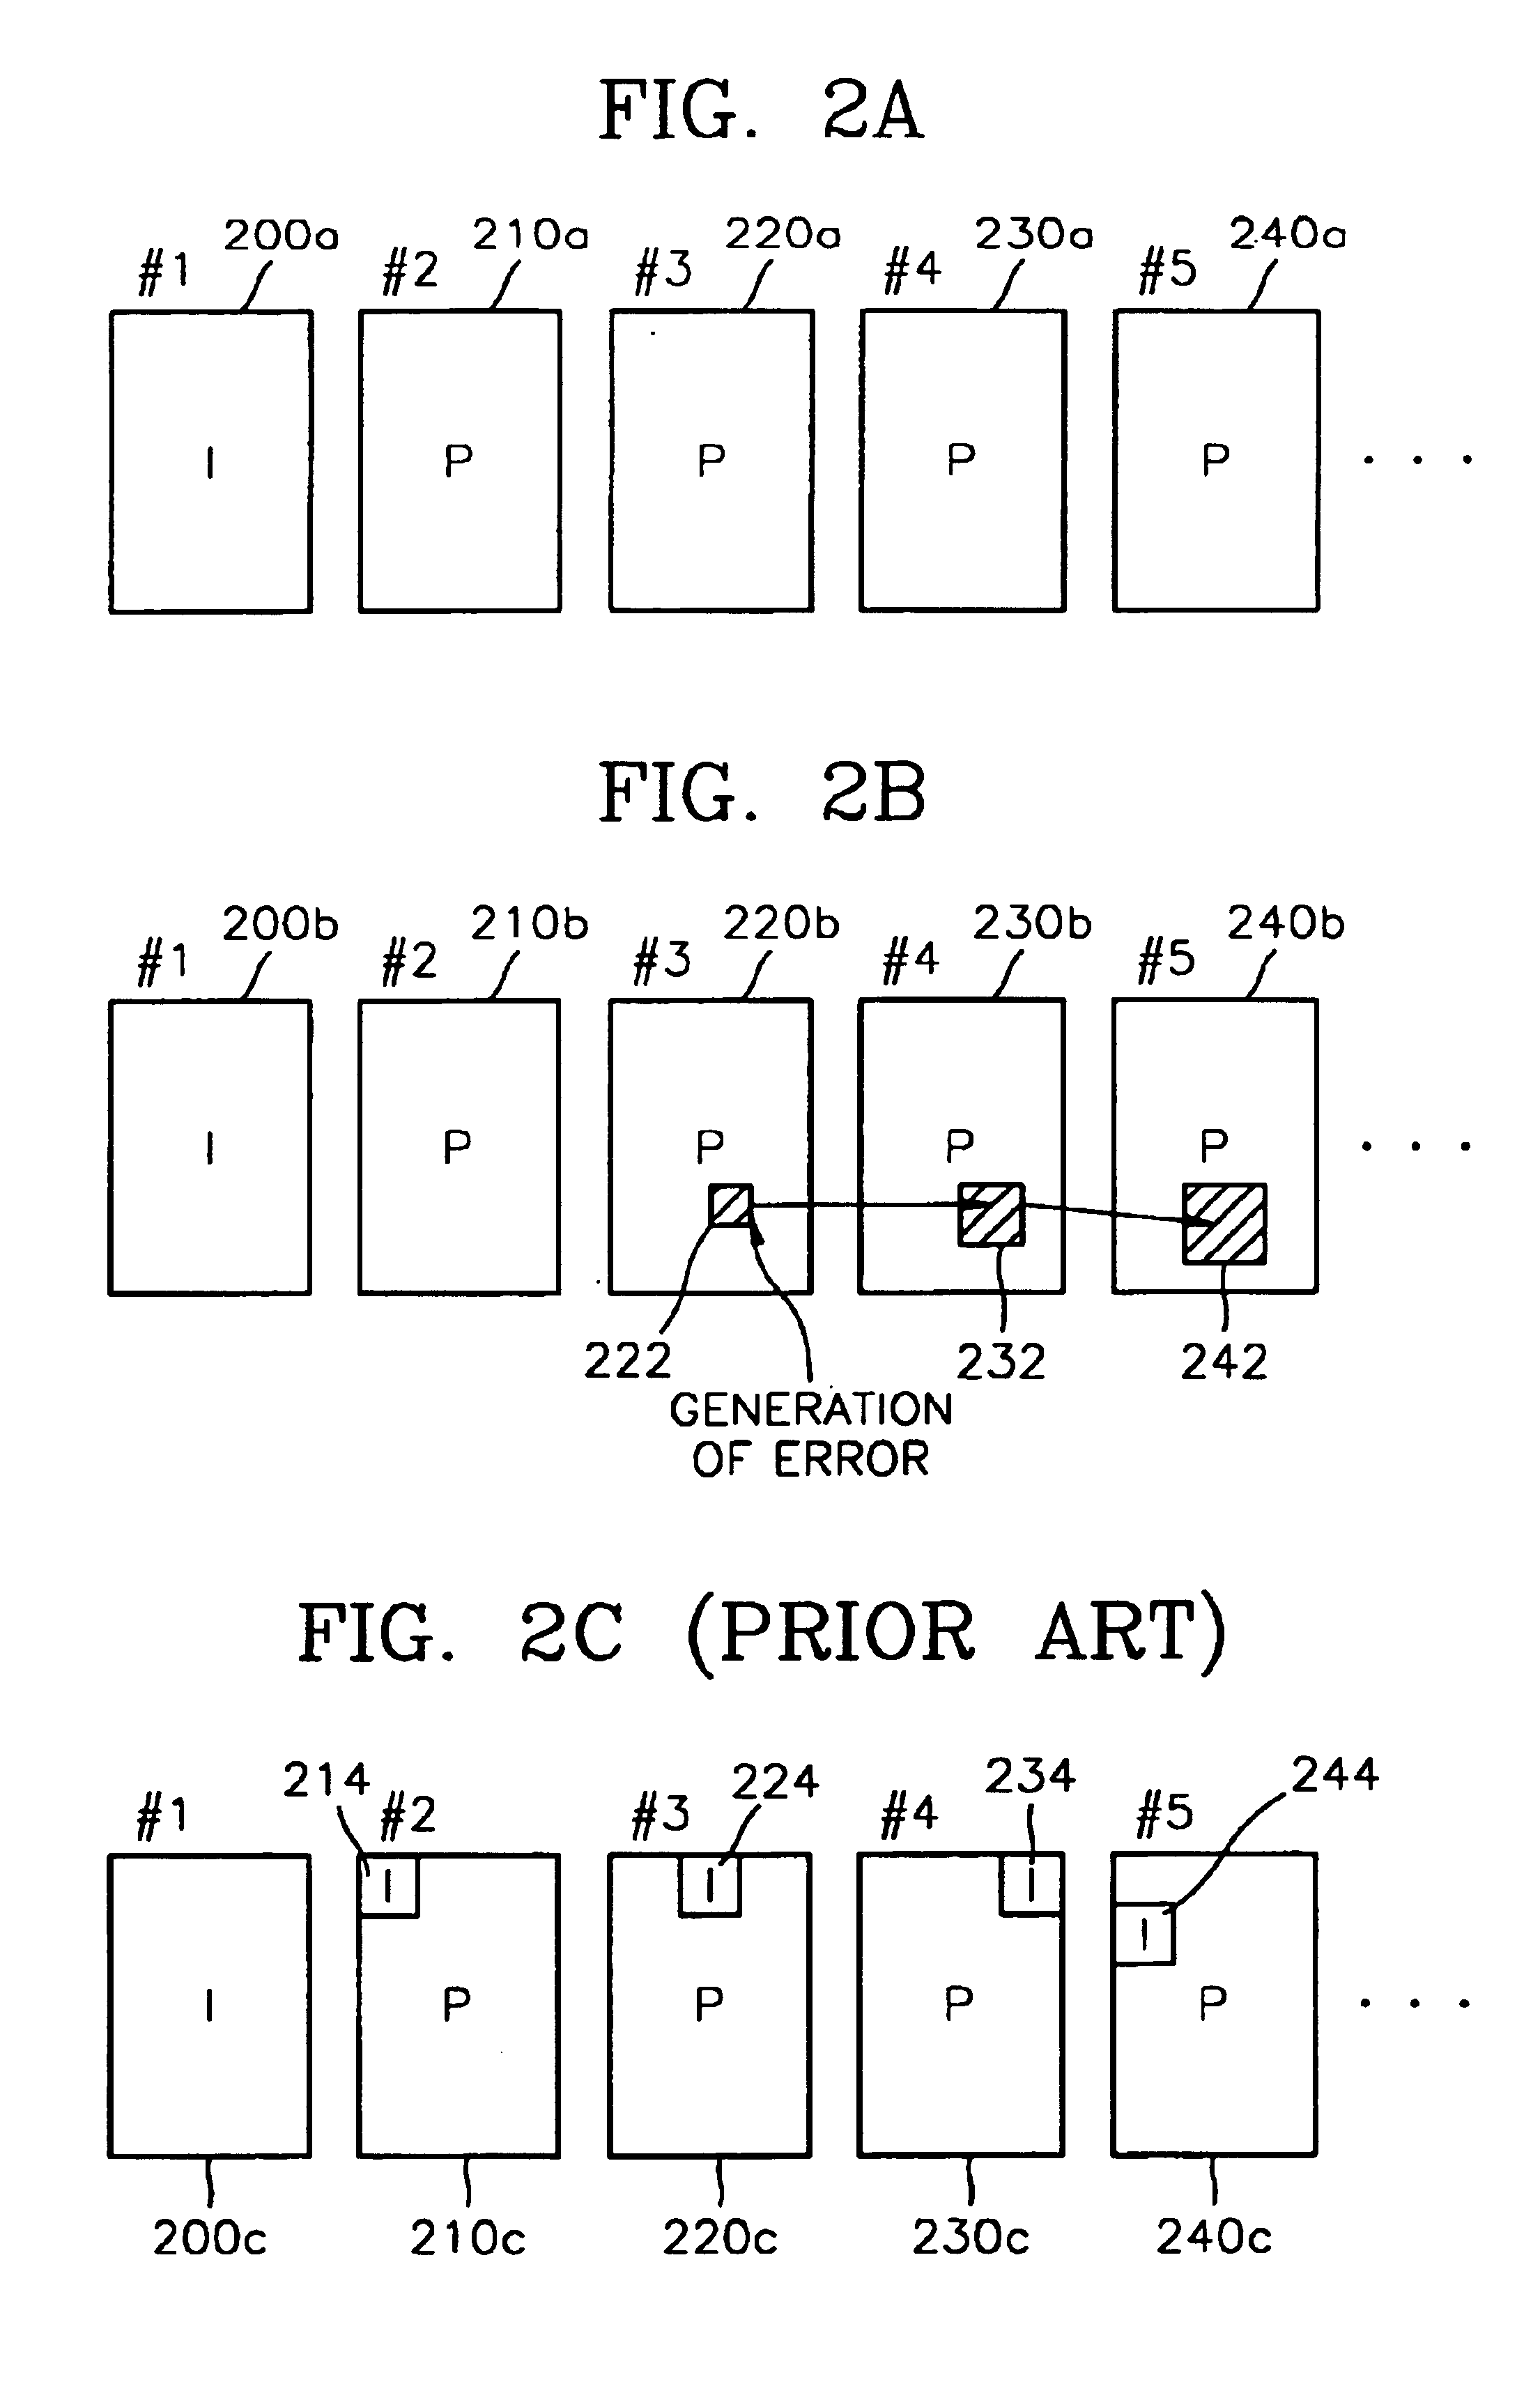 Transmitting/received data processing method for inhibiting error propagation in digital image data communications system and recording medium therefor